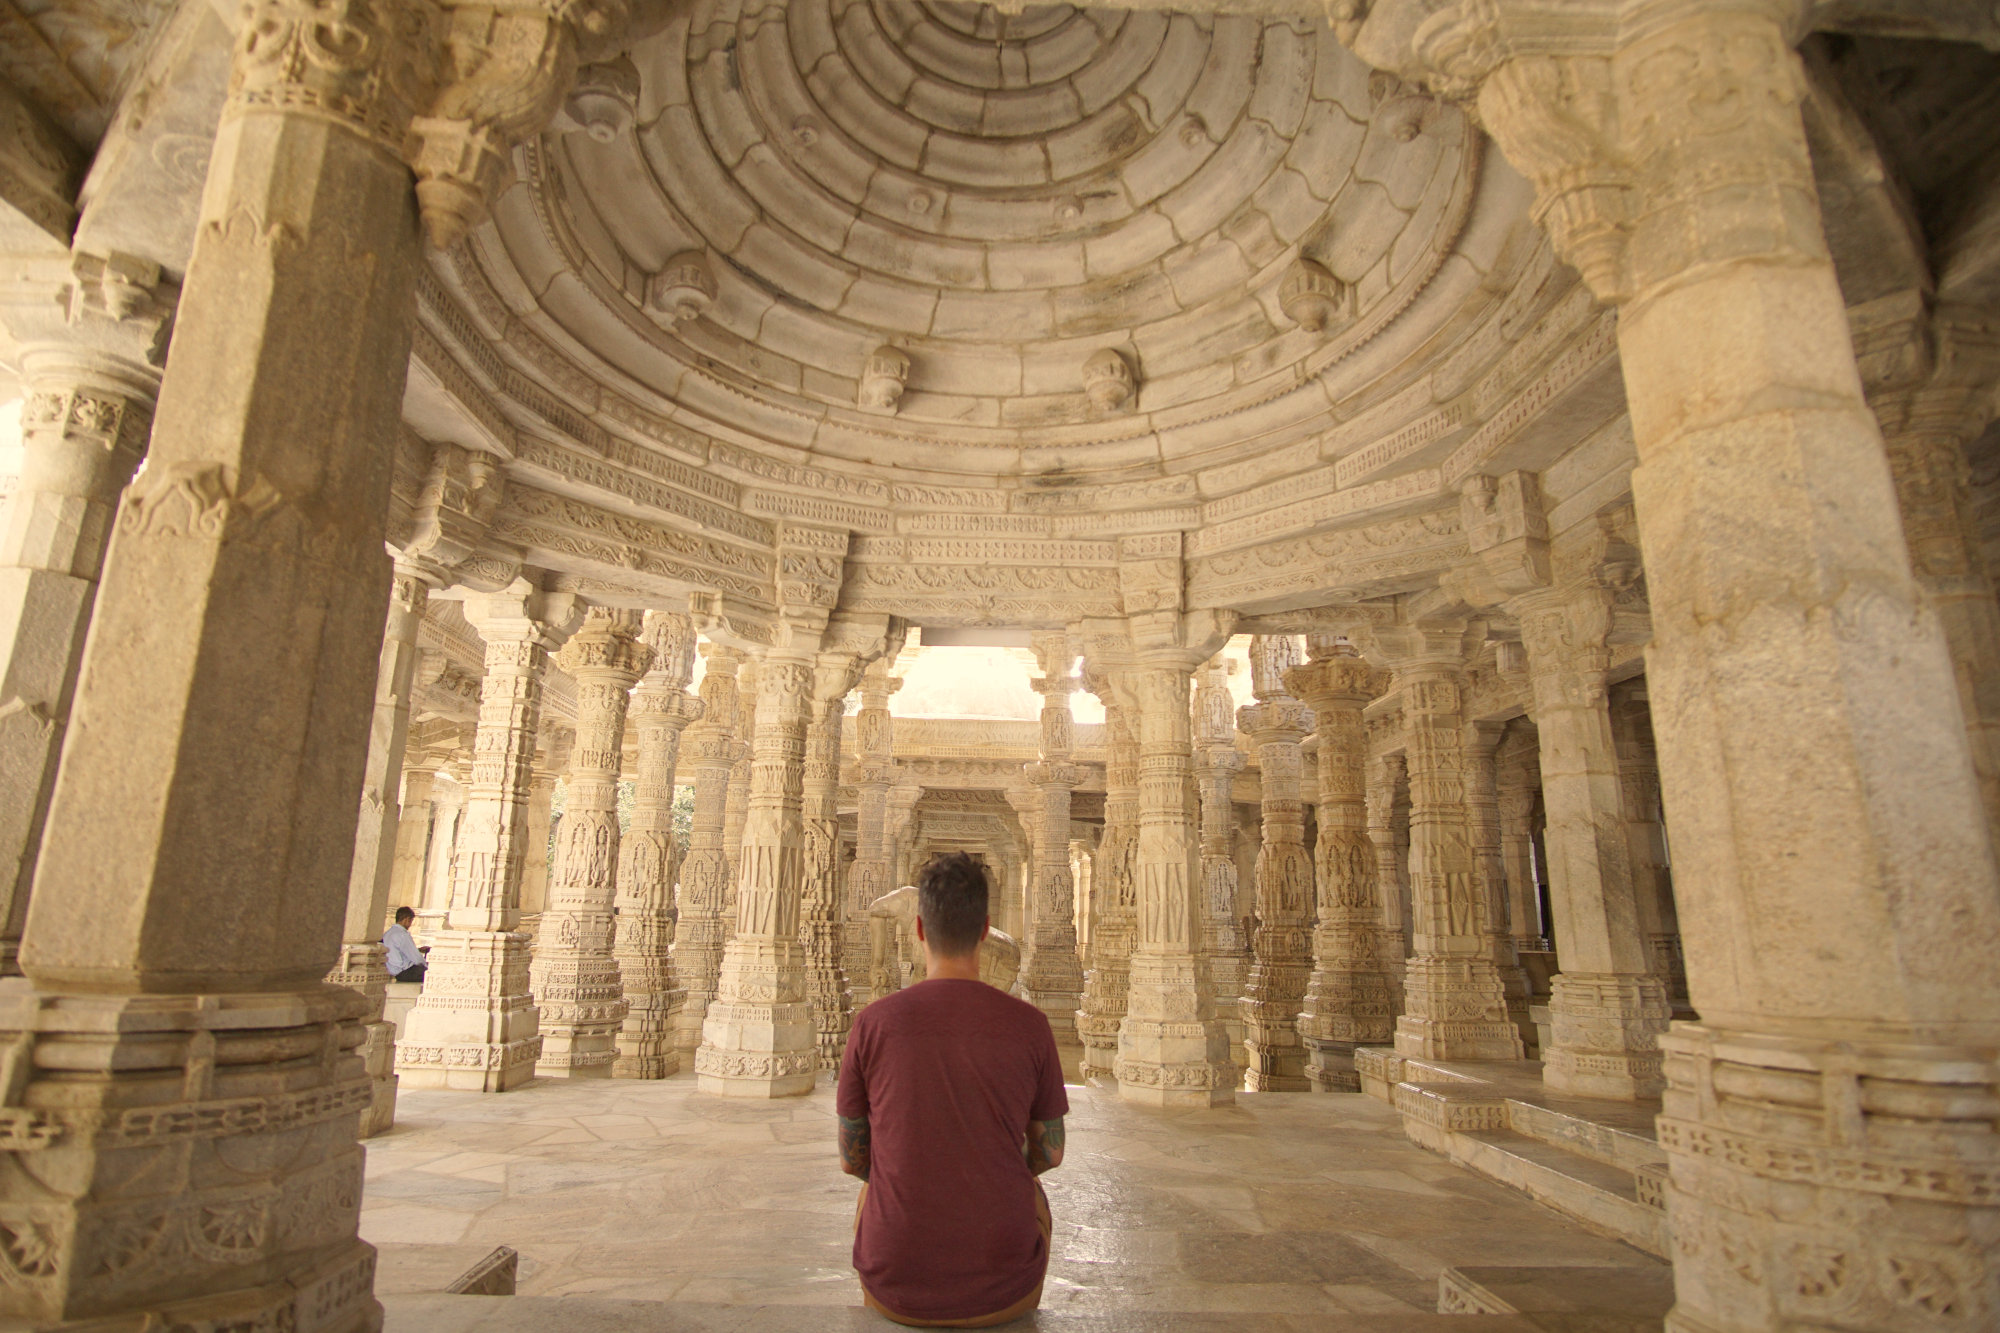 The marble temple